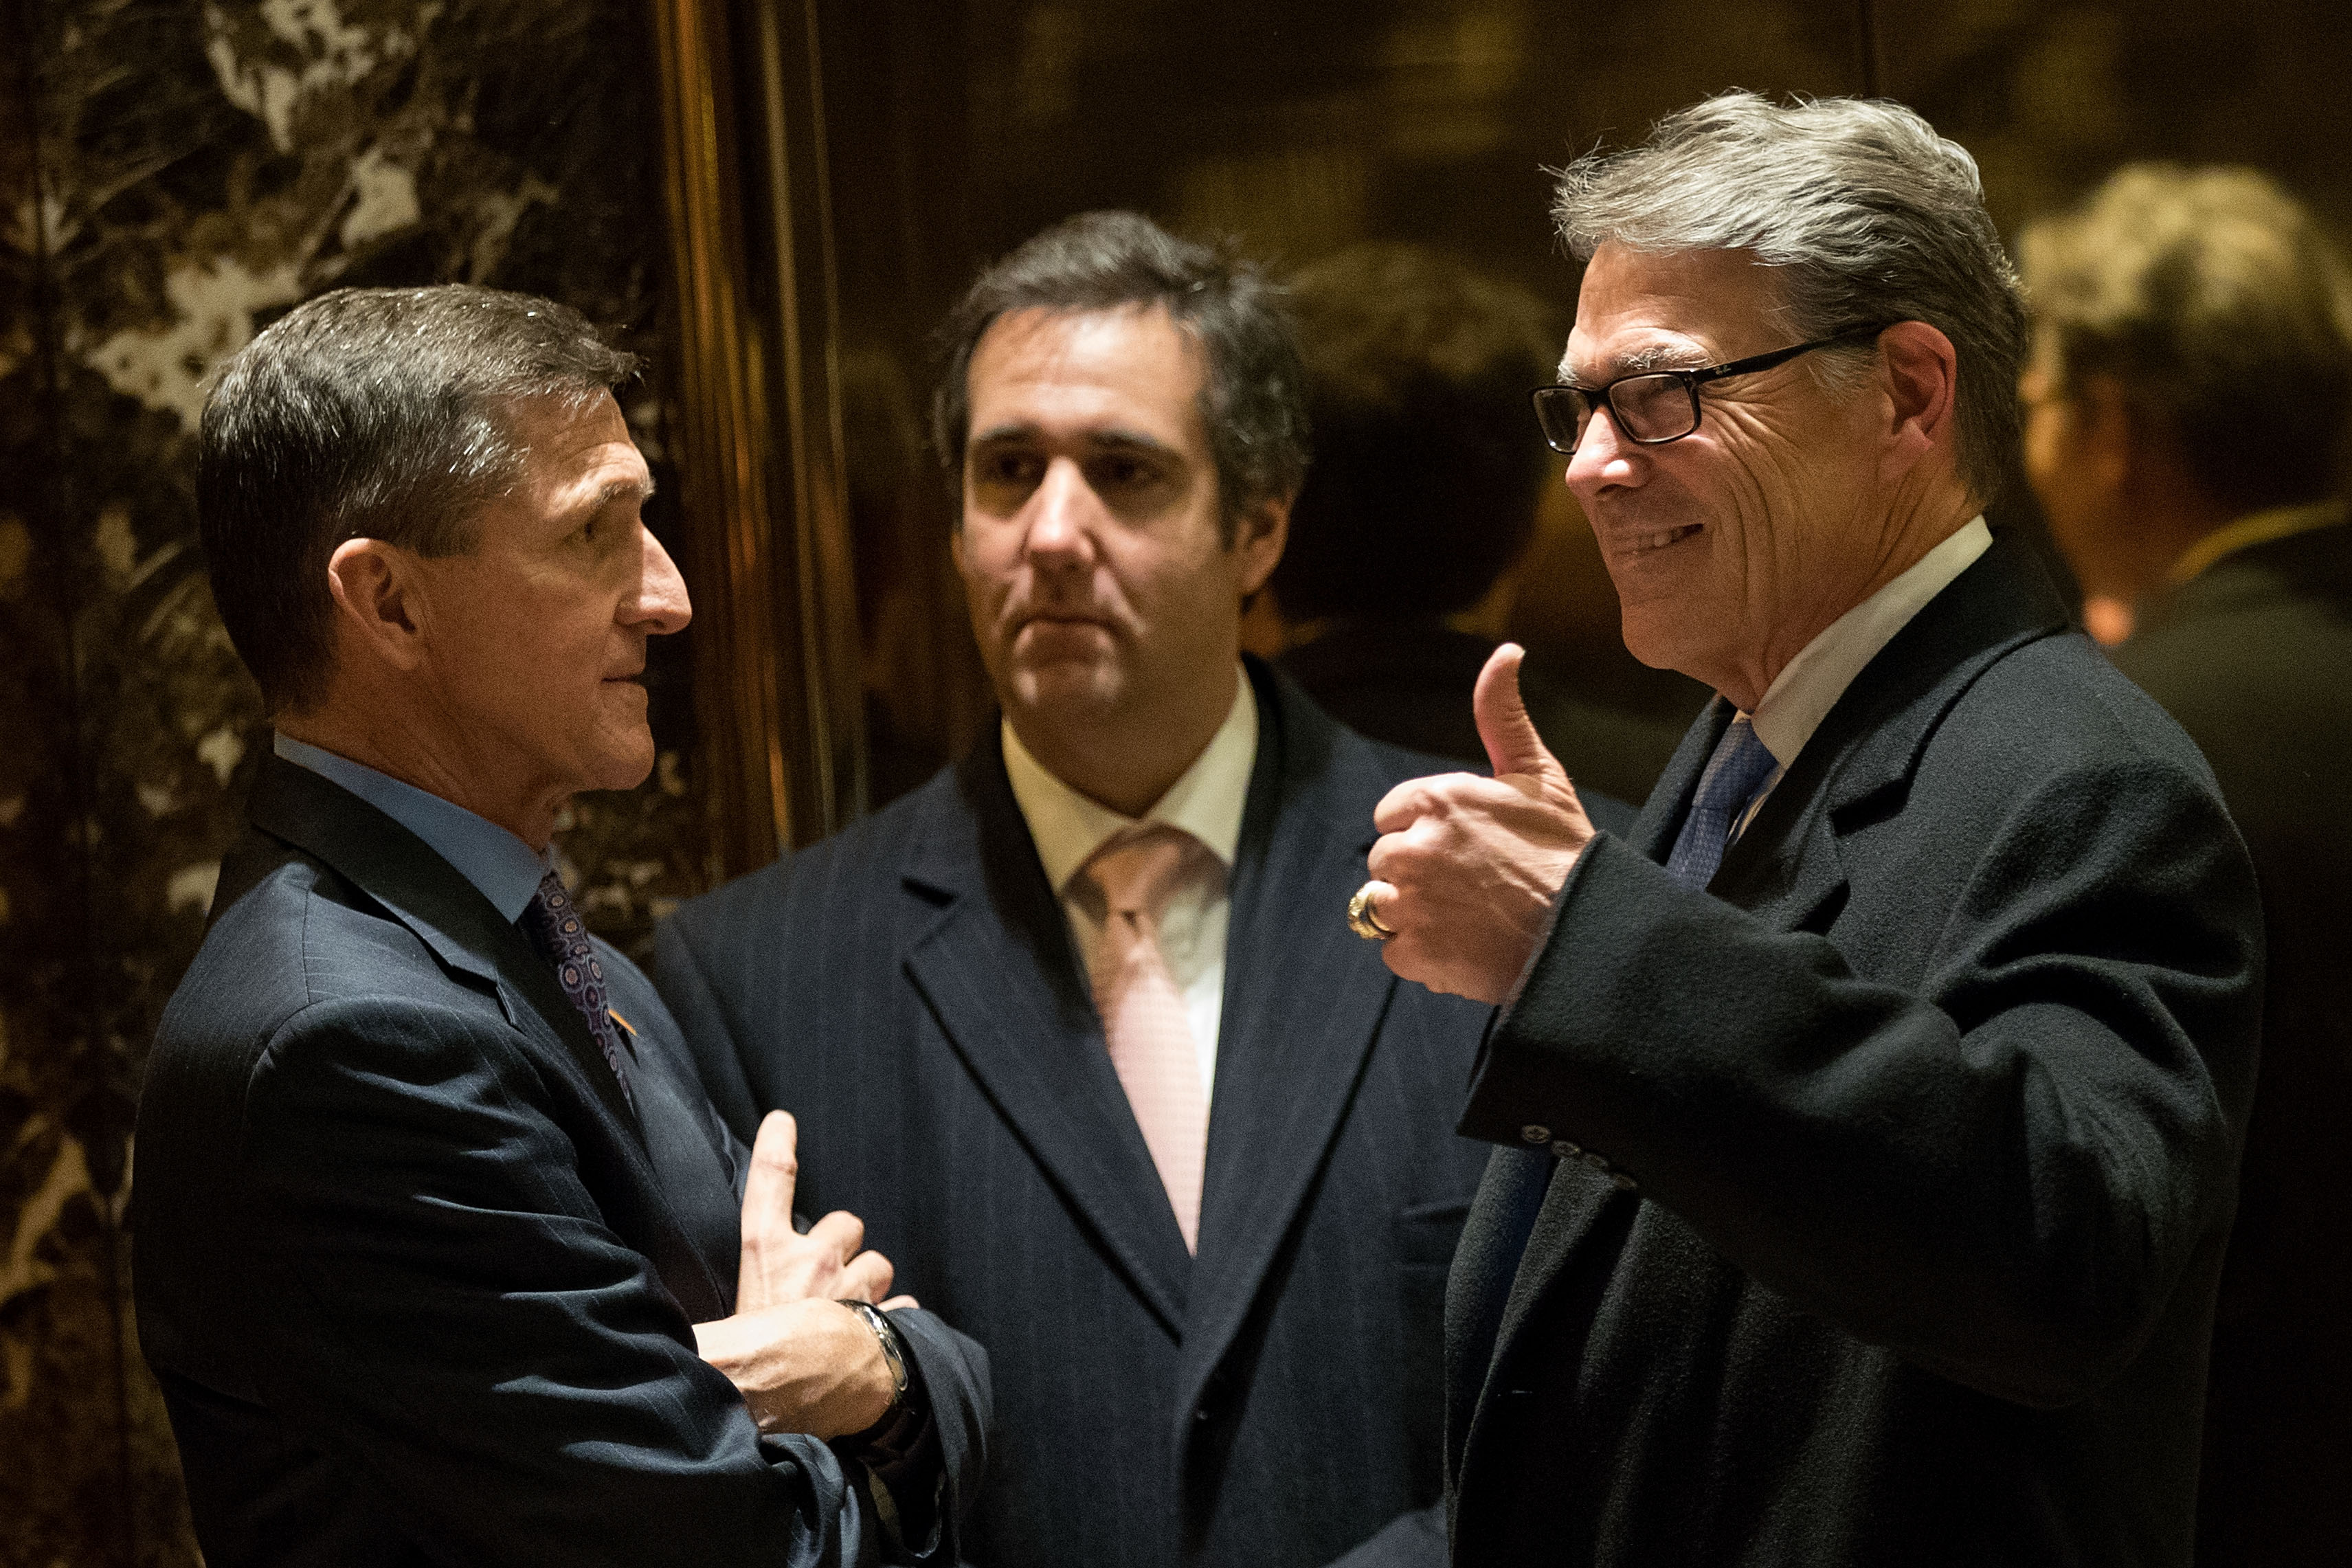 Retired Lt. Gen. Michael Flynn, Michael Cohen, executive vice president of the Trump Organization and special counsel to Donald Trump, and former Texas Governor Rick Perry at Trump Tower, Dec. 12, 2016 in New York City. (Drew Angerer—Getty Images)